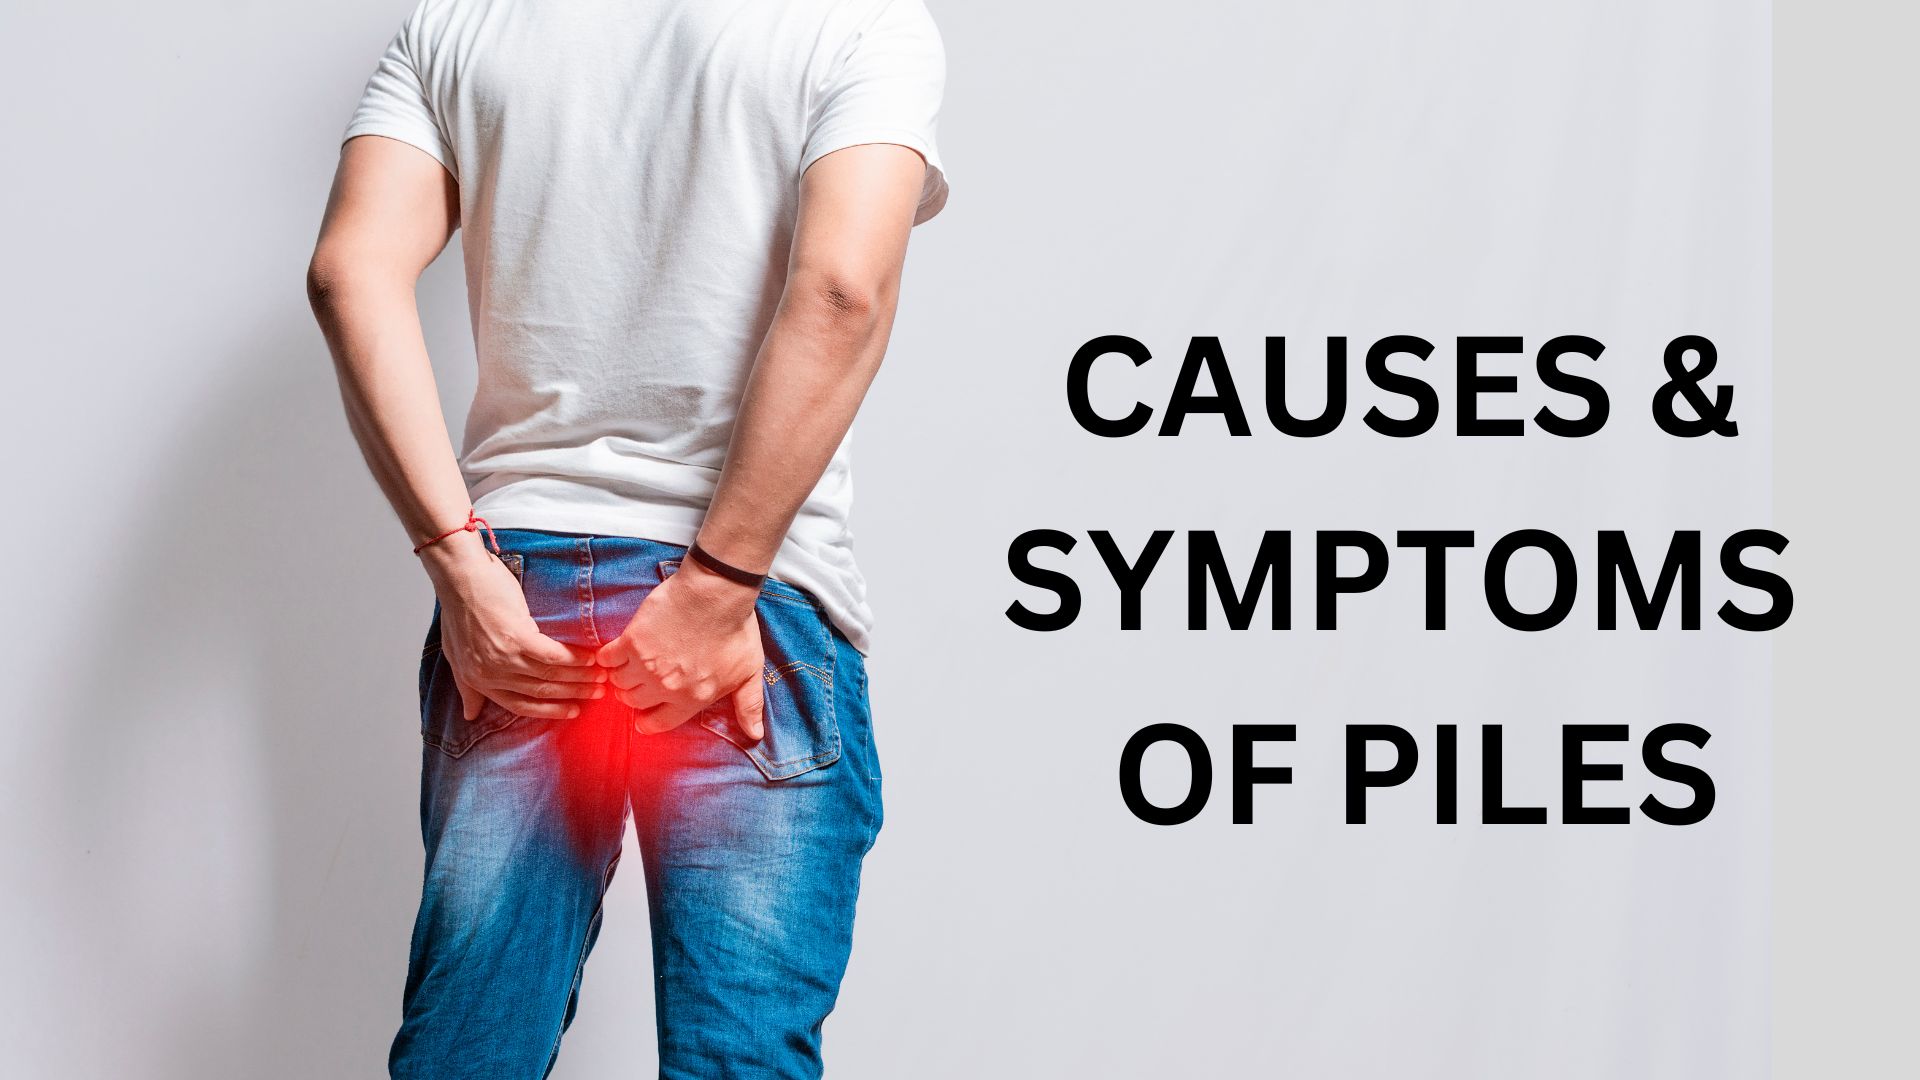 Piles: Symptoms, Causes and Treatment